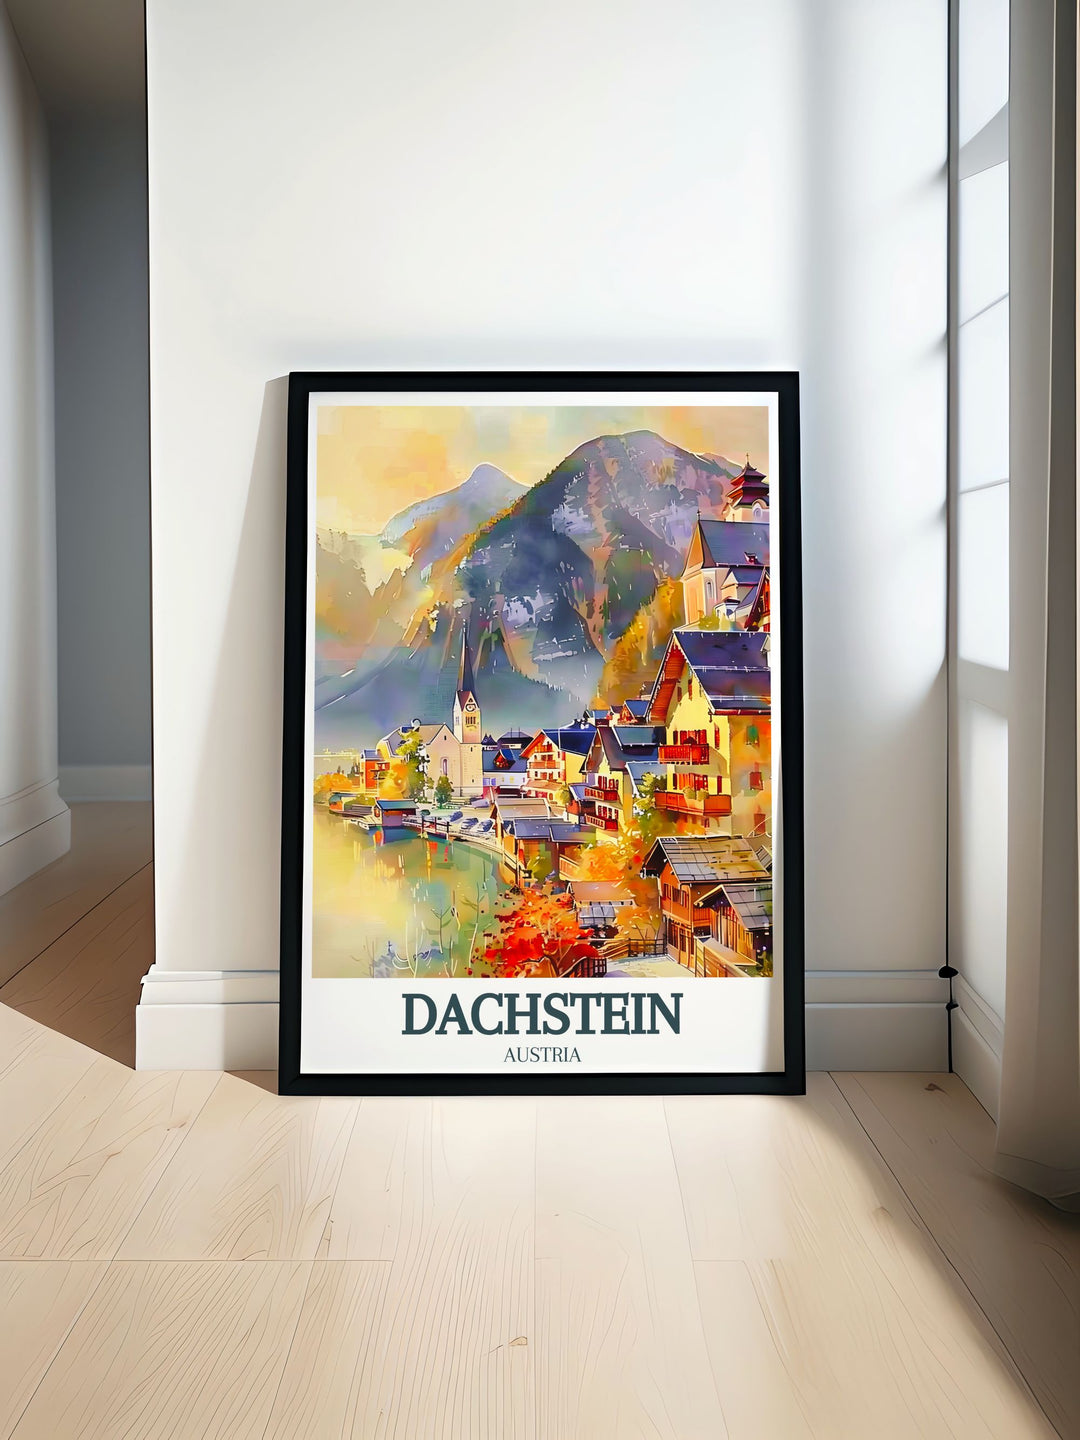 Beautiful Hallstatt Lake, Village of Hallstatt travel poster featuring the serene lake and charming village perfect for home decor and nature enthusiasts who appreciate Austrias picturesque landscapes.